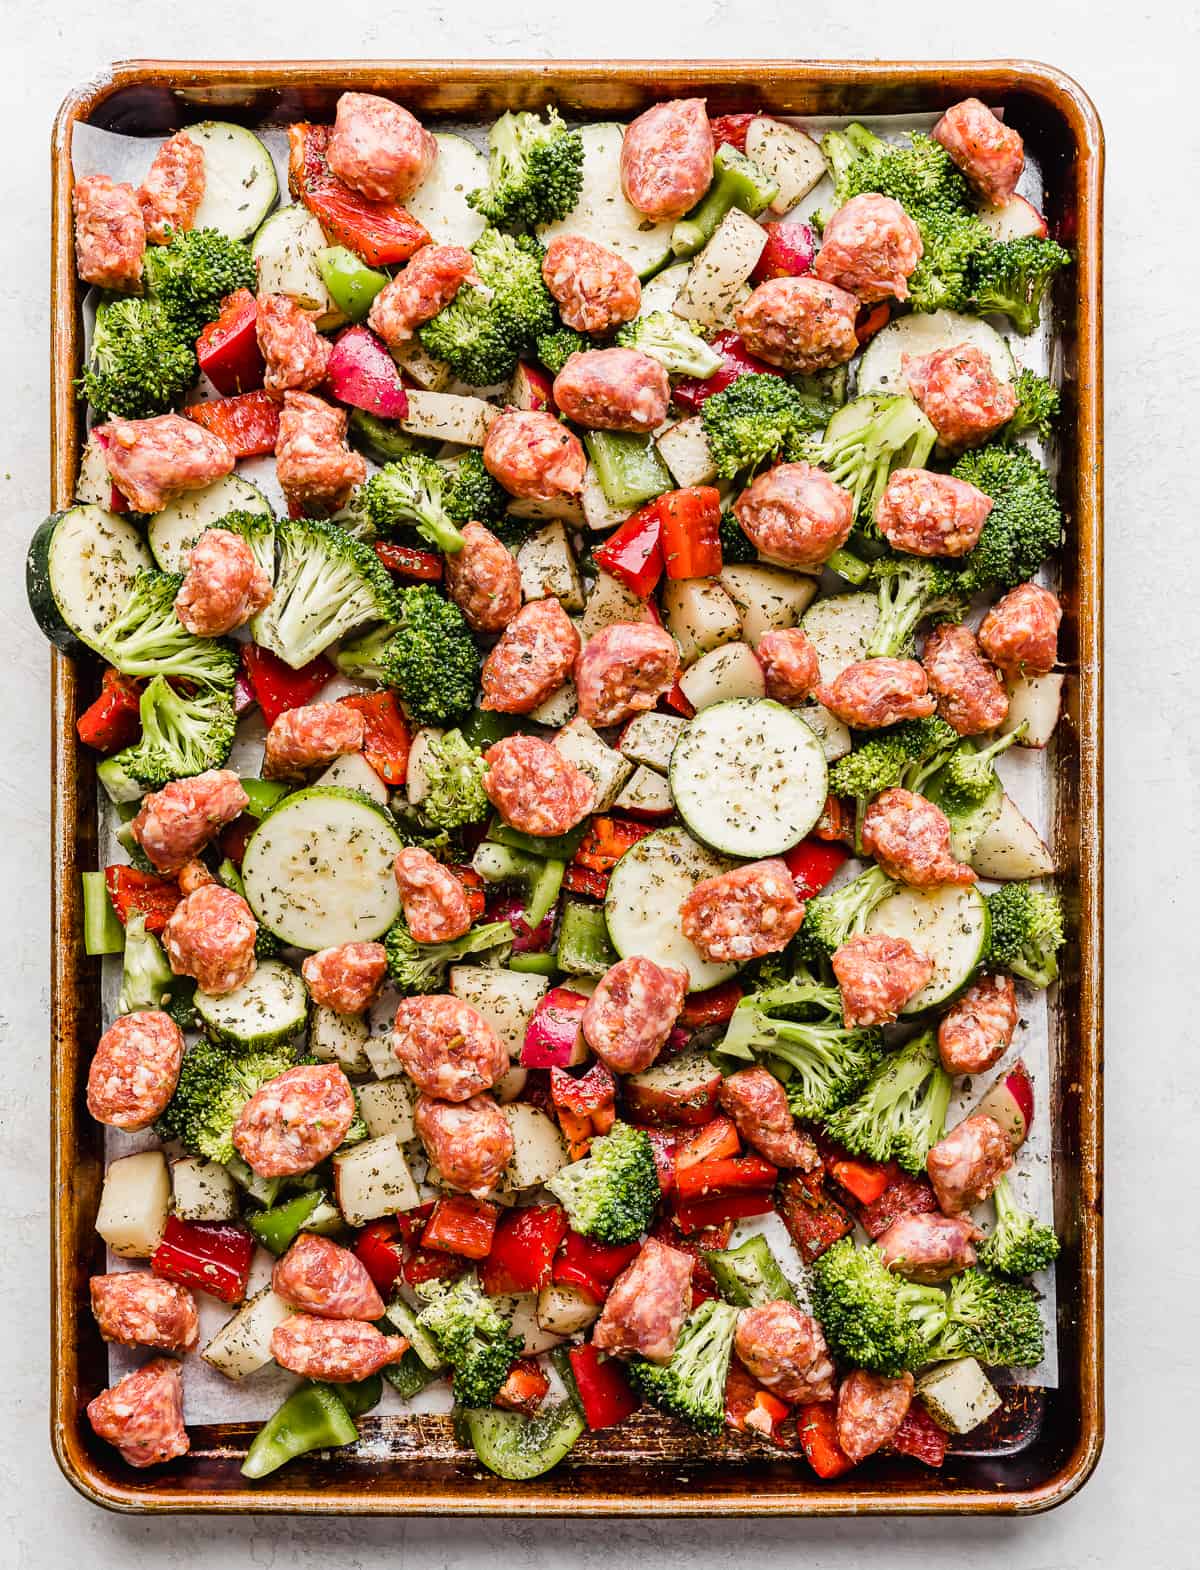 Unbaked Italian sausage and chopped veggies on a baking sheet.